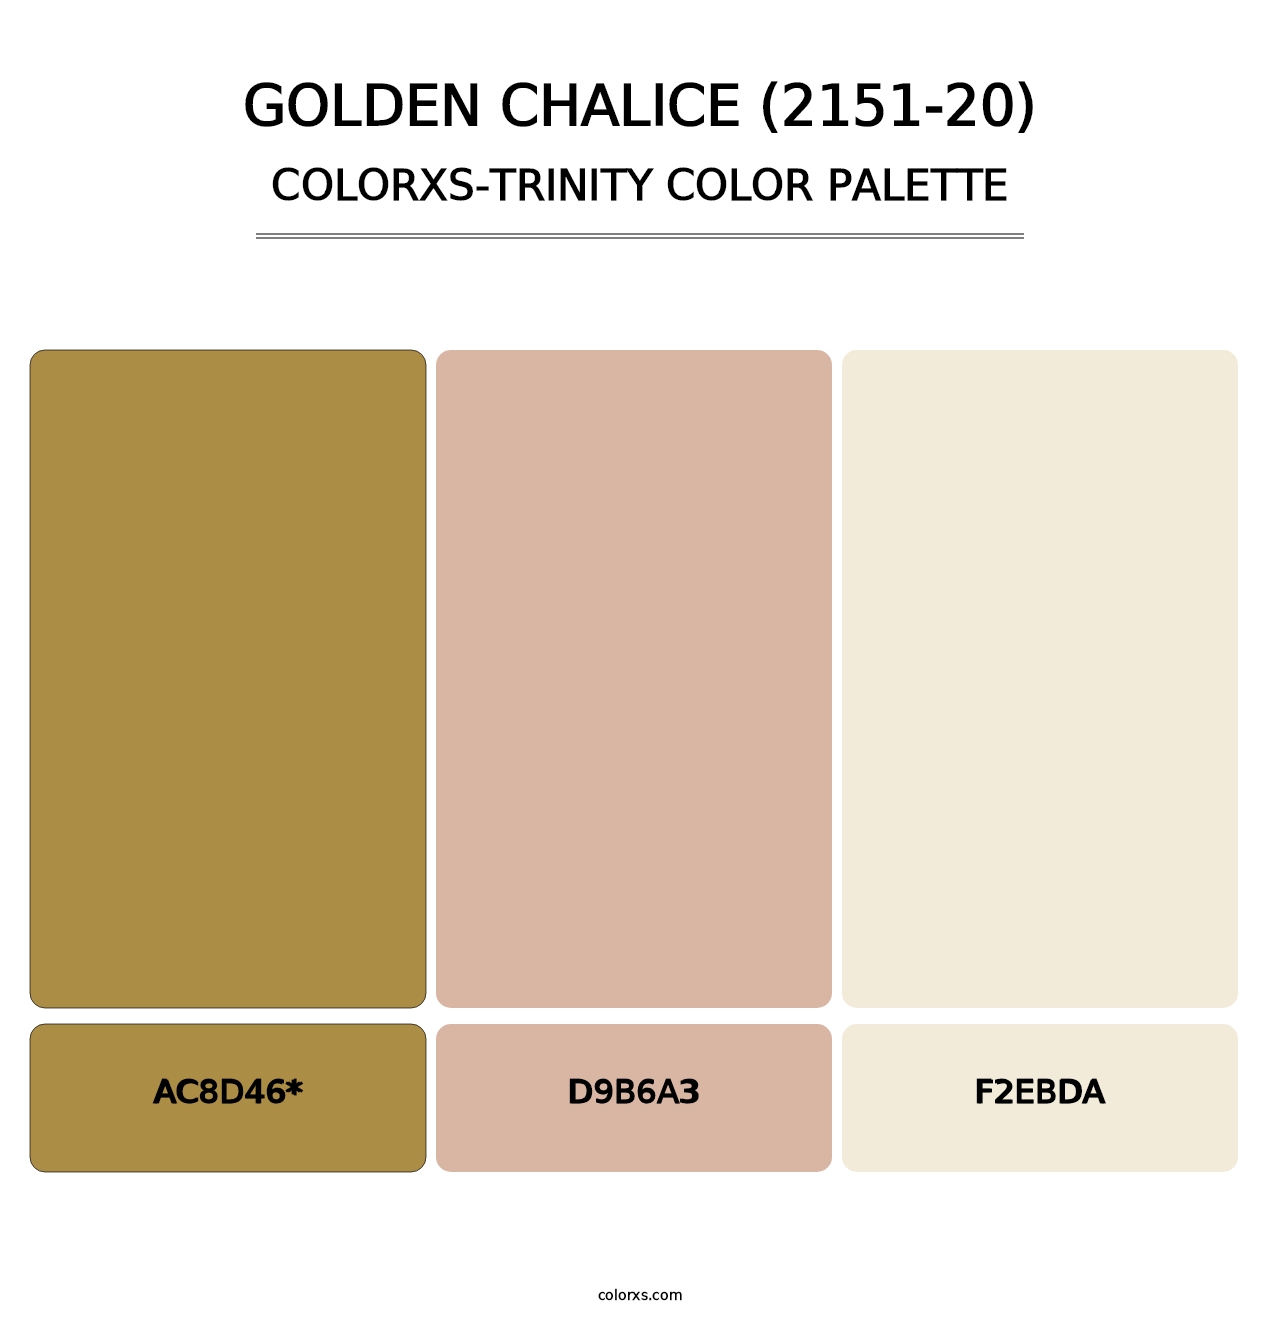 Golden Chalice (2151-20) - Colorxs Trinity Palette